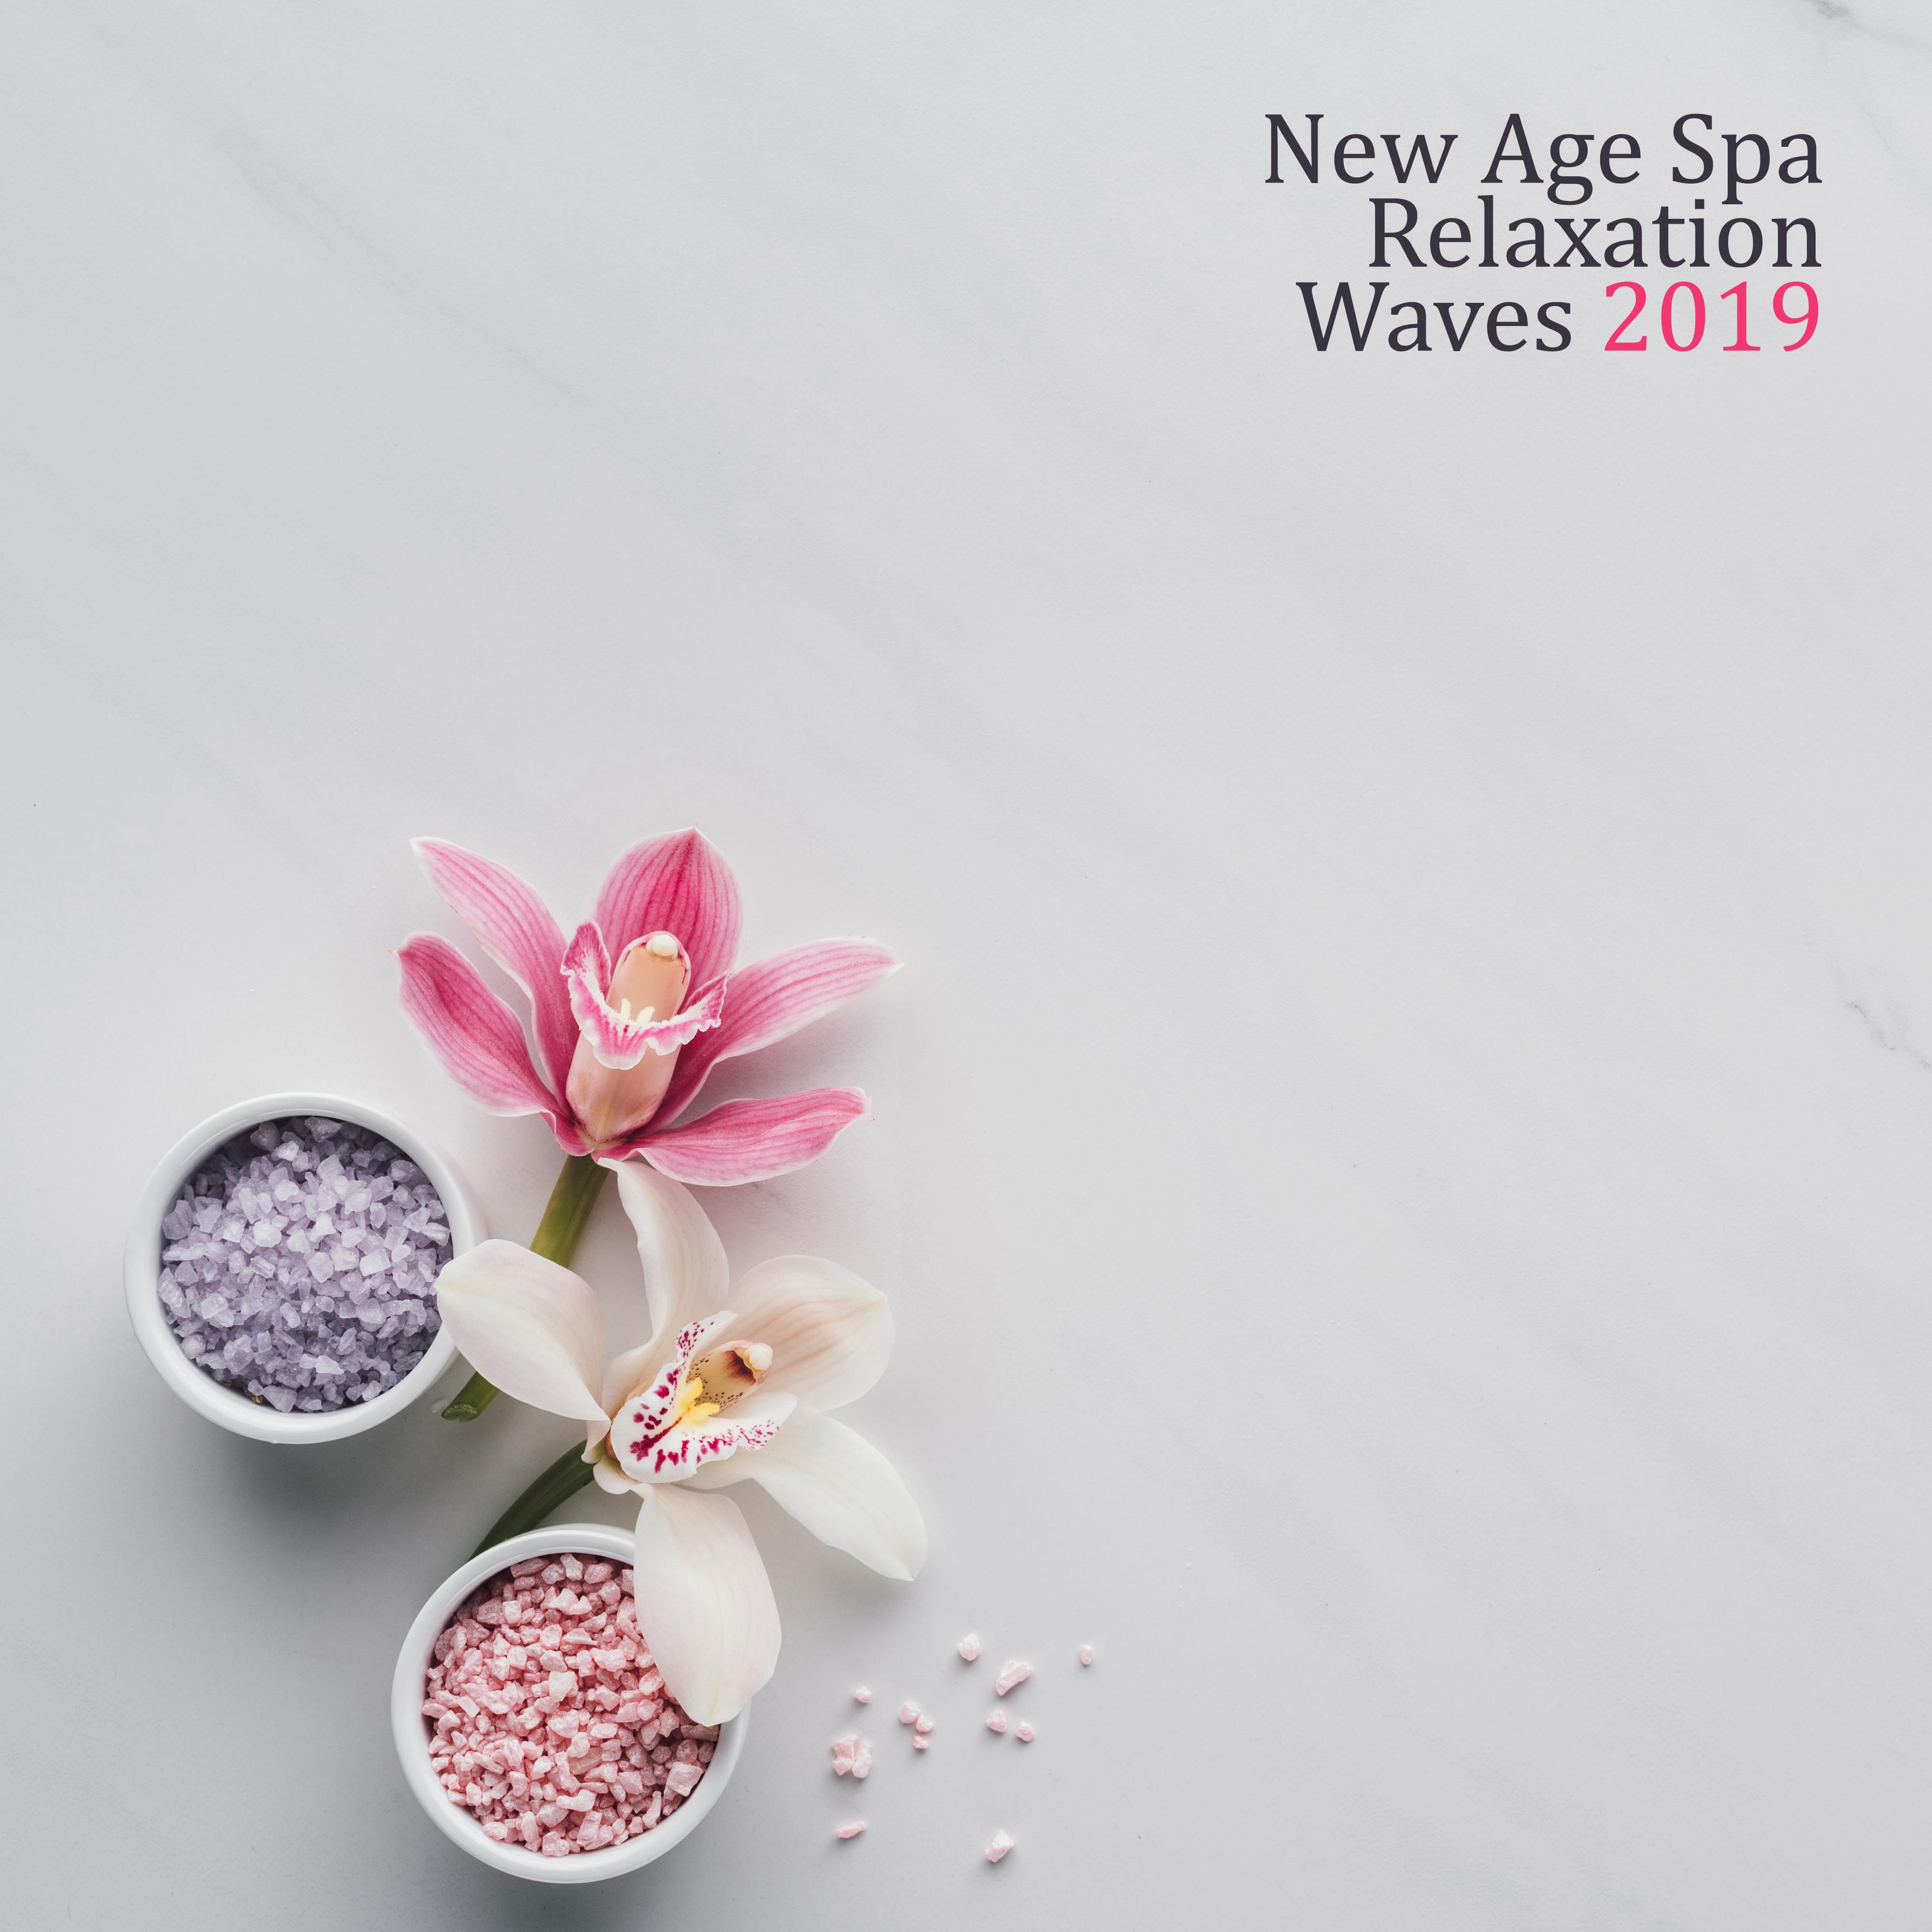 New Age Spa Relaxation Waves 2019